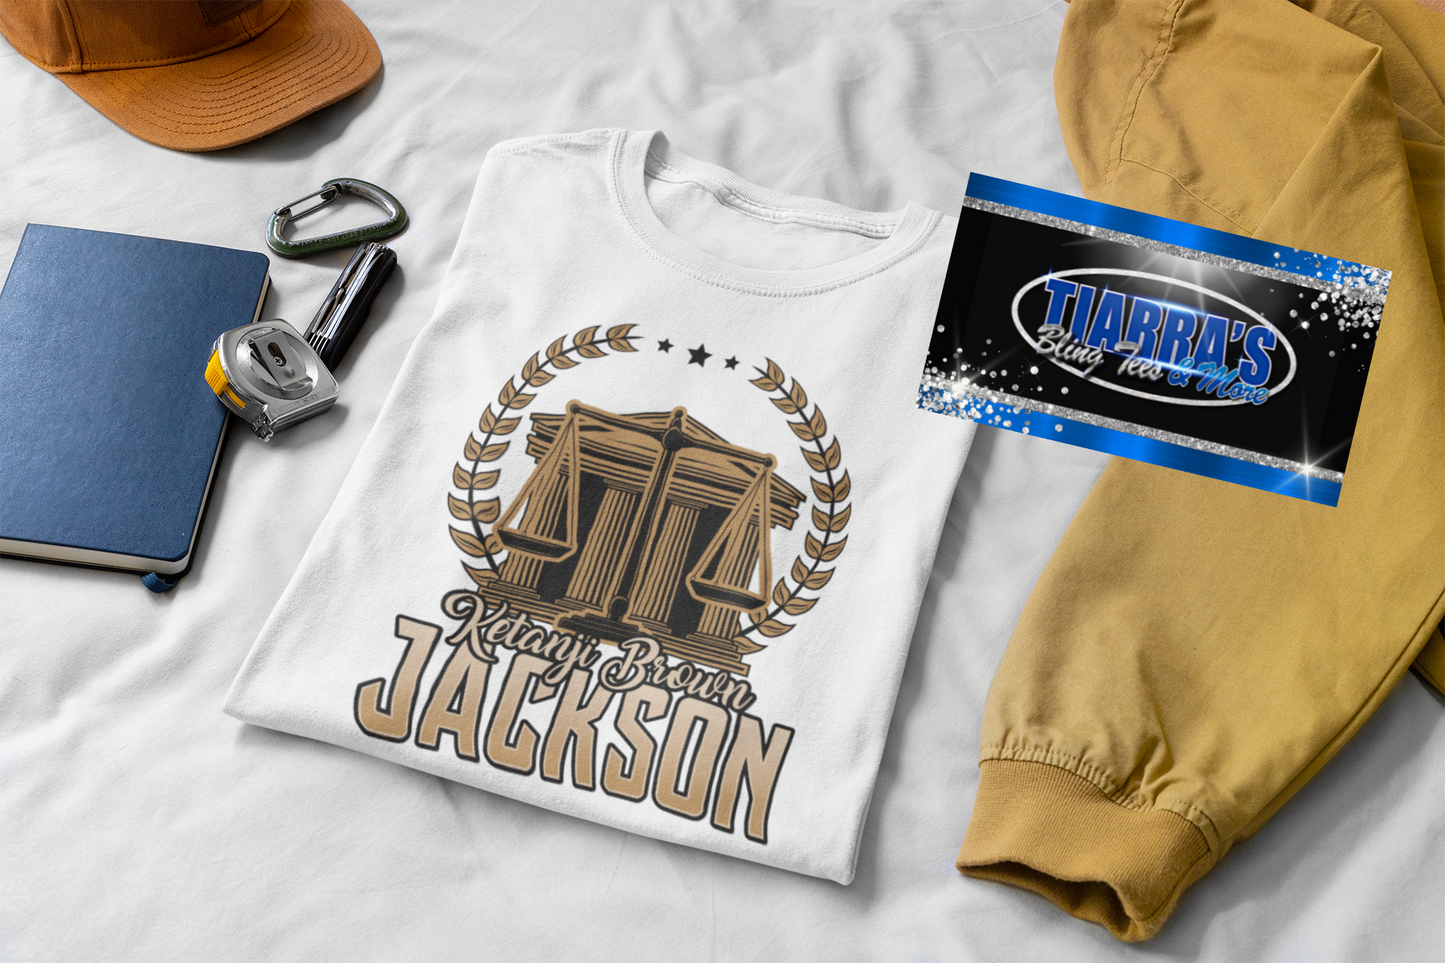 Youth Sizes - The Ketanji Brown Jackson Collection - 16 Styles Available!